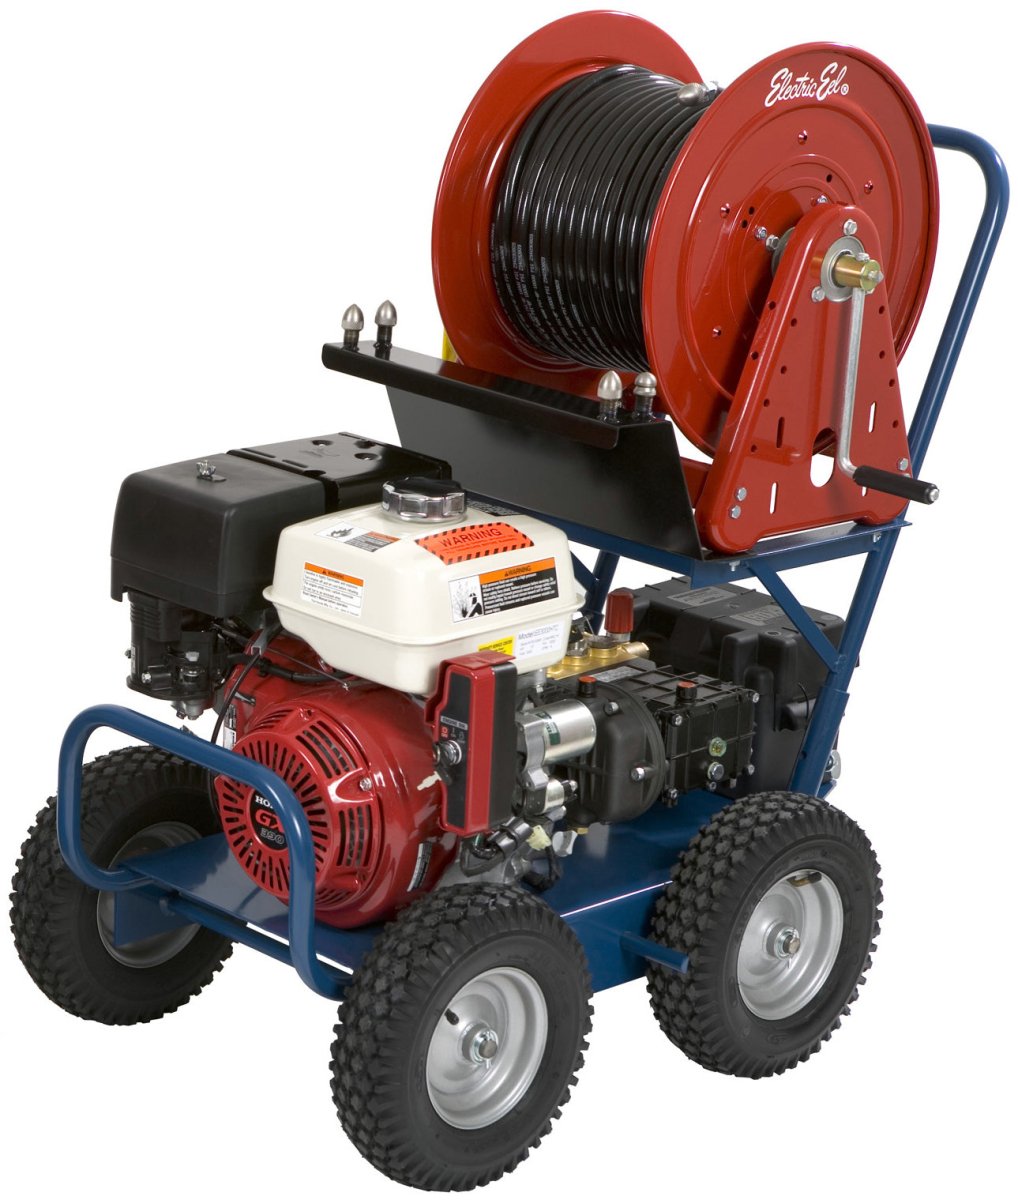 EJ3000 Gasoline Powered Drain Jetter - Electric Eel